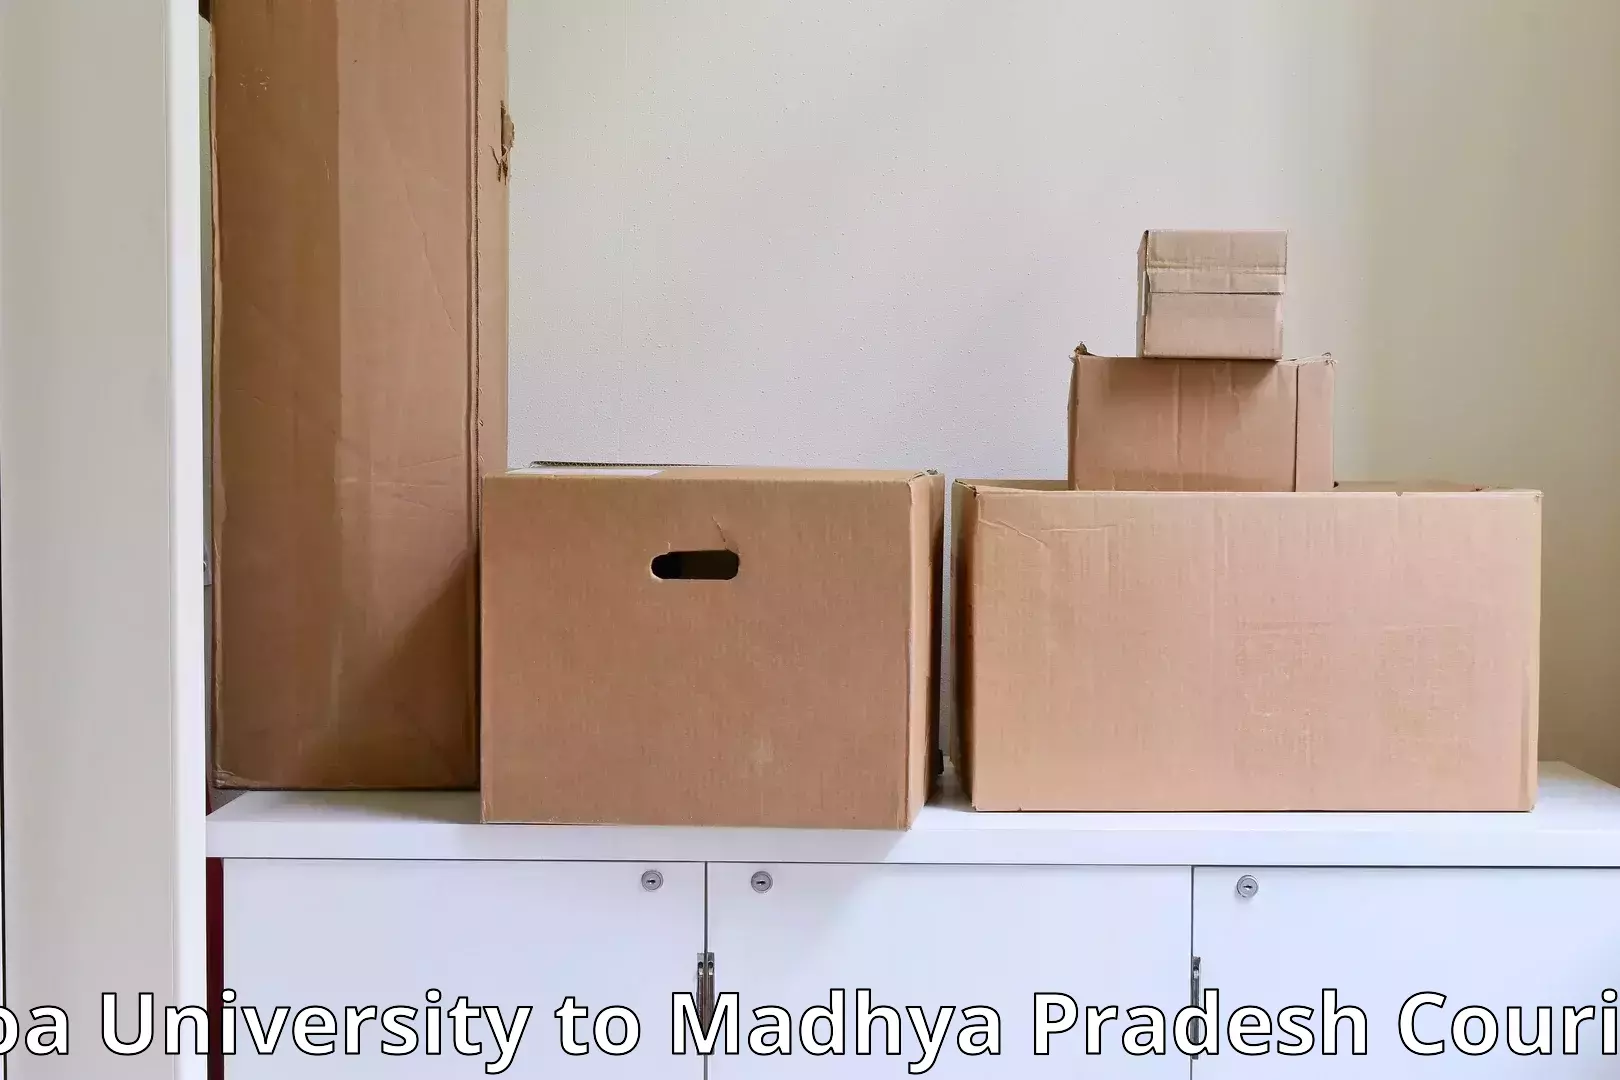 Comprehensive moving services in Goa University to Chanderi